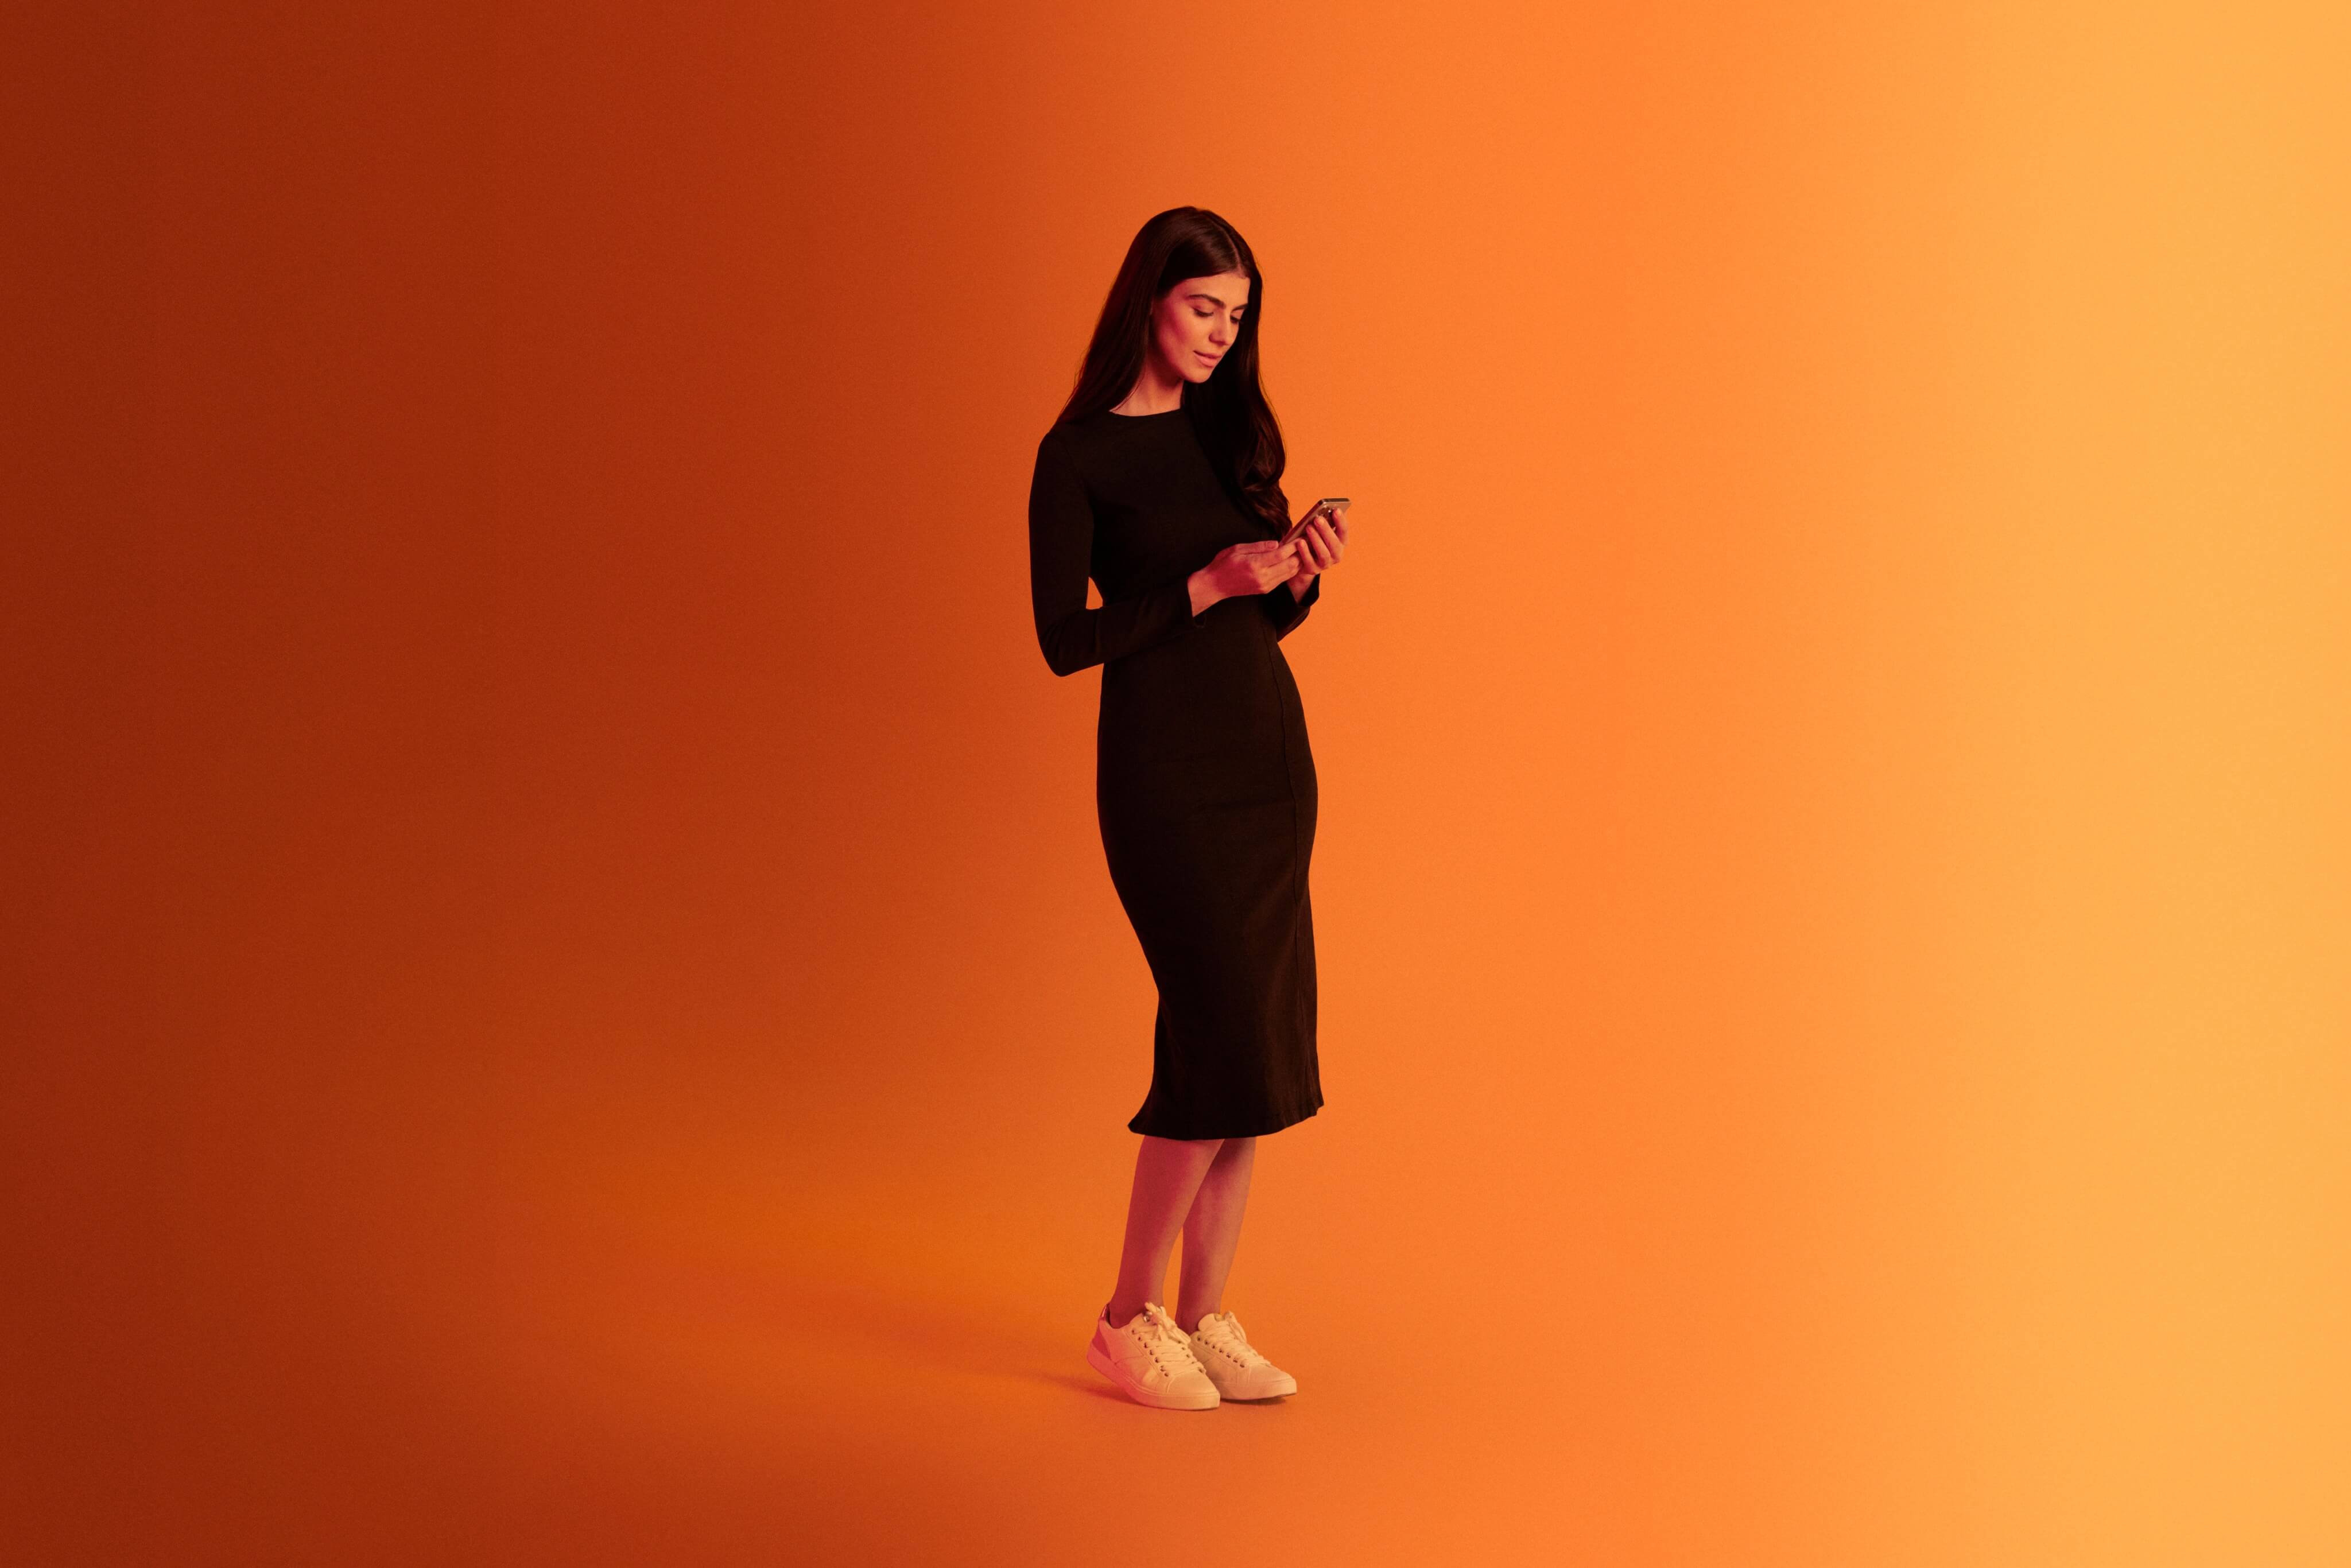 tanding woman engaging with the Xapo Bank app on her mobile phone, overlaid with an orange hue.